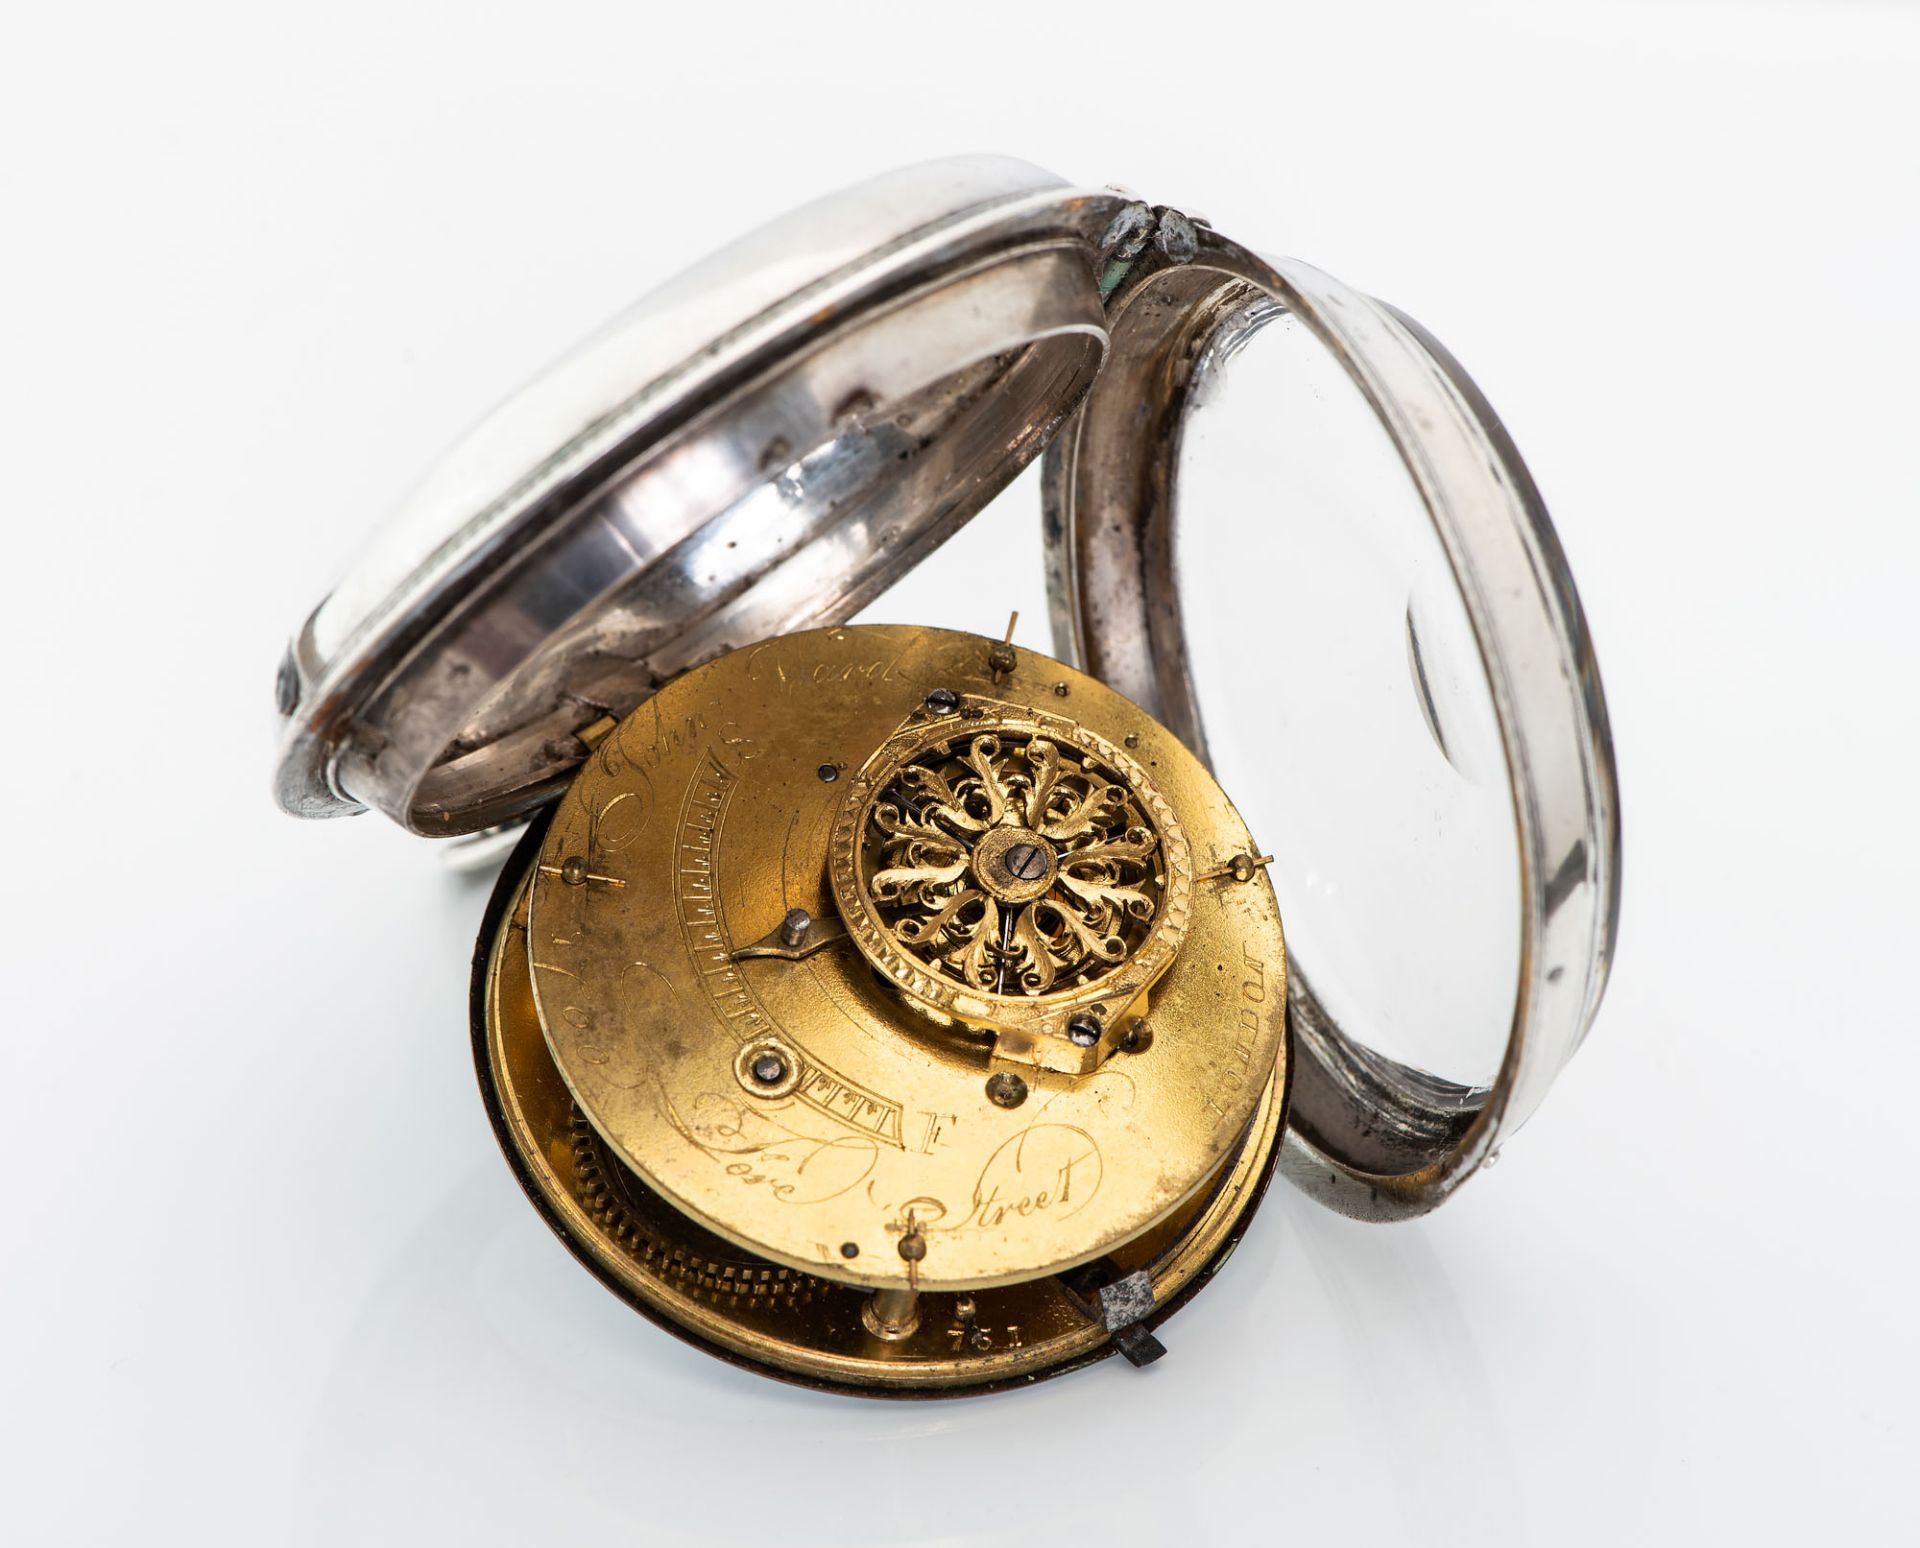 A S?lver Verge Fusee Pocket Watch by John Ward, England, London, 1784-1792 - Image 3 of 5